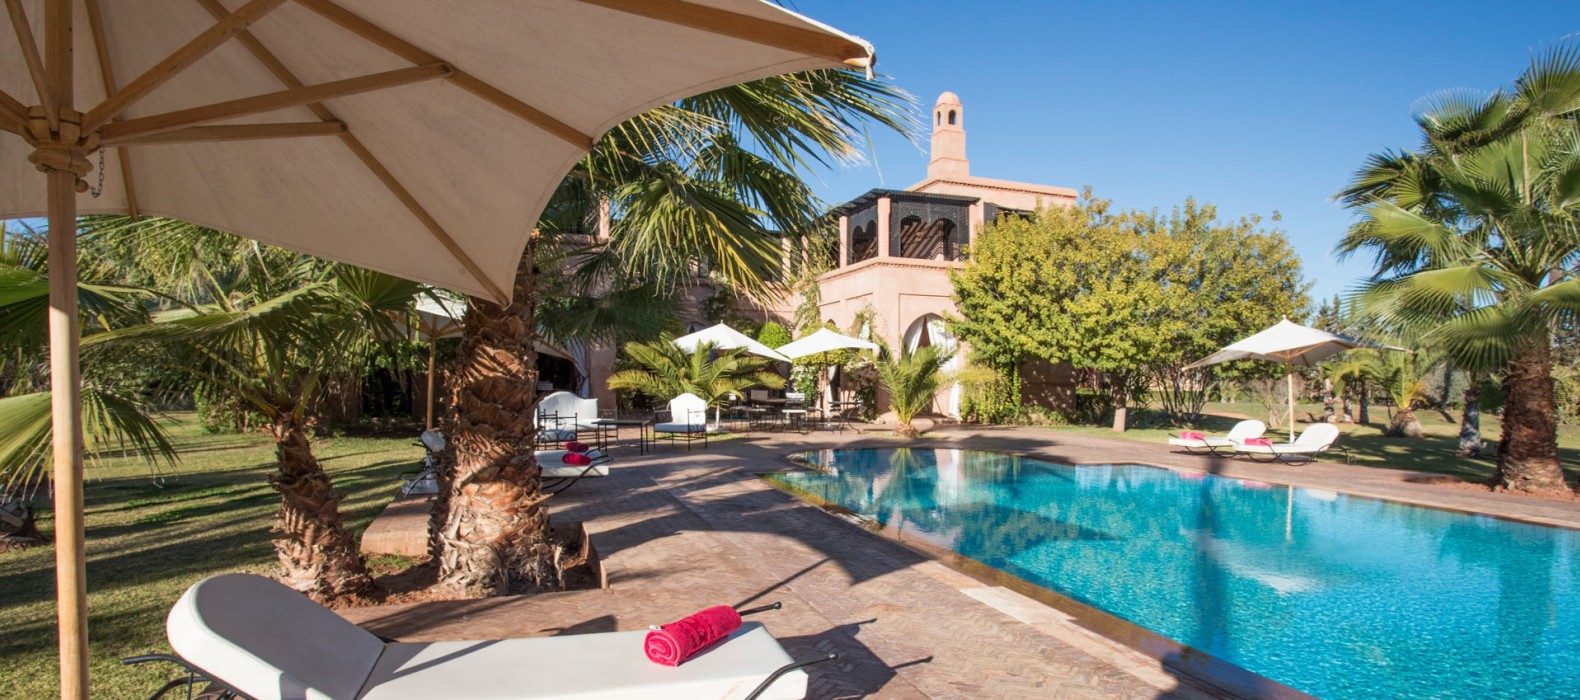 Pool view of Villa Mansour in Marrakech